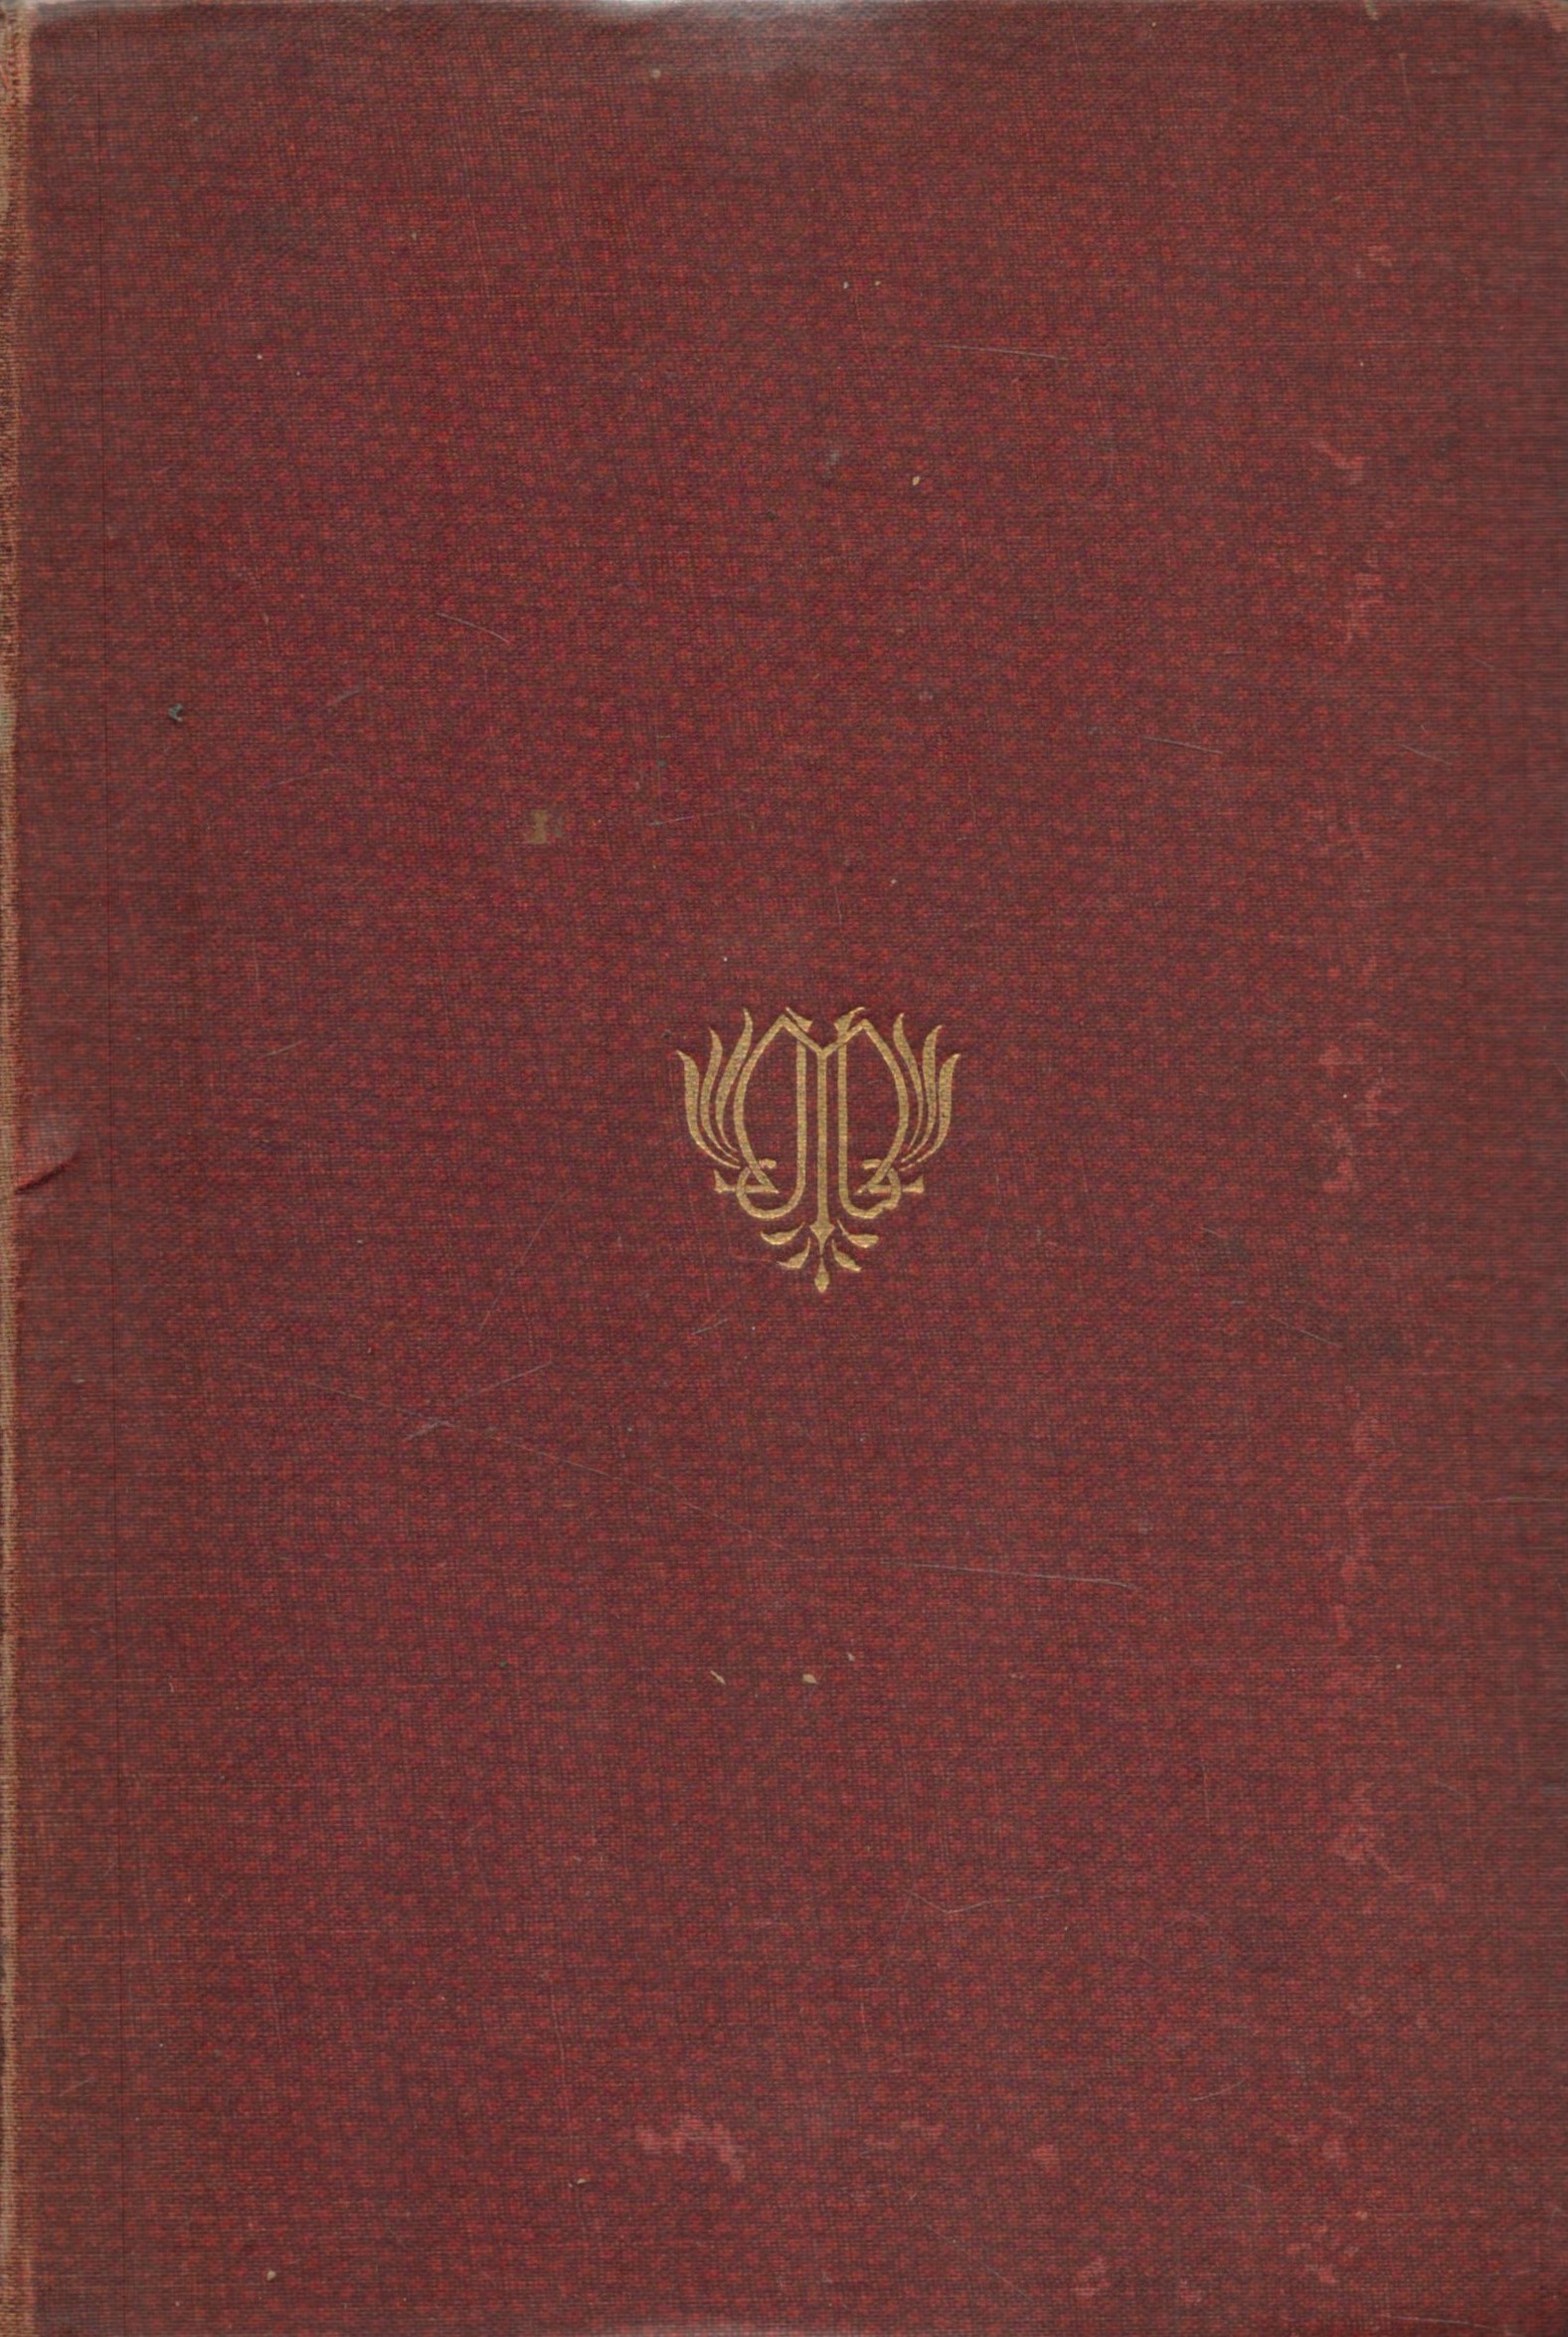 R. Bosworth Smith M. A. Mohammed and Mohammedanism. Published by John Murray, London 1889. 3rd